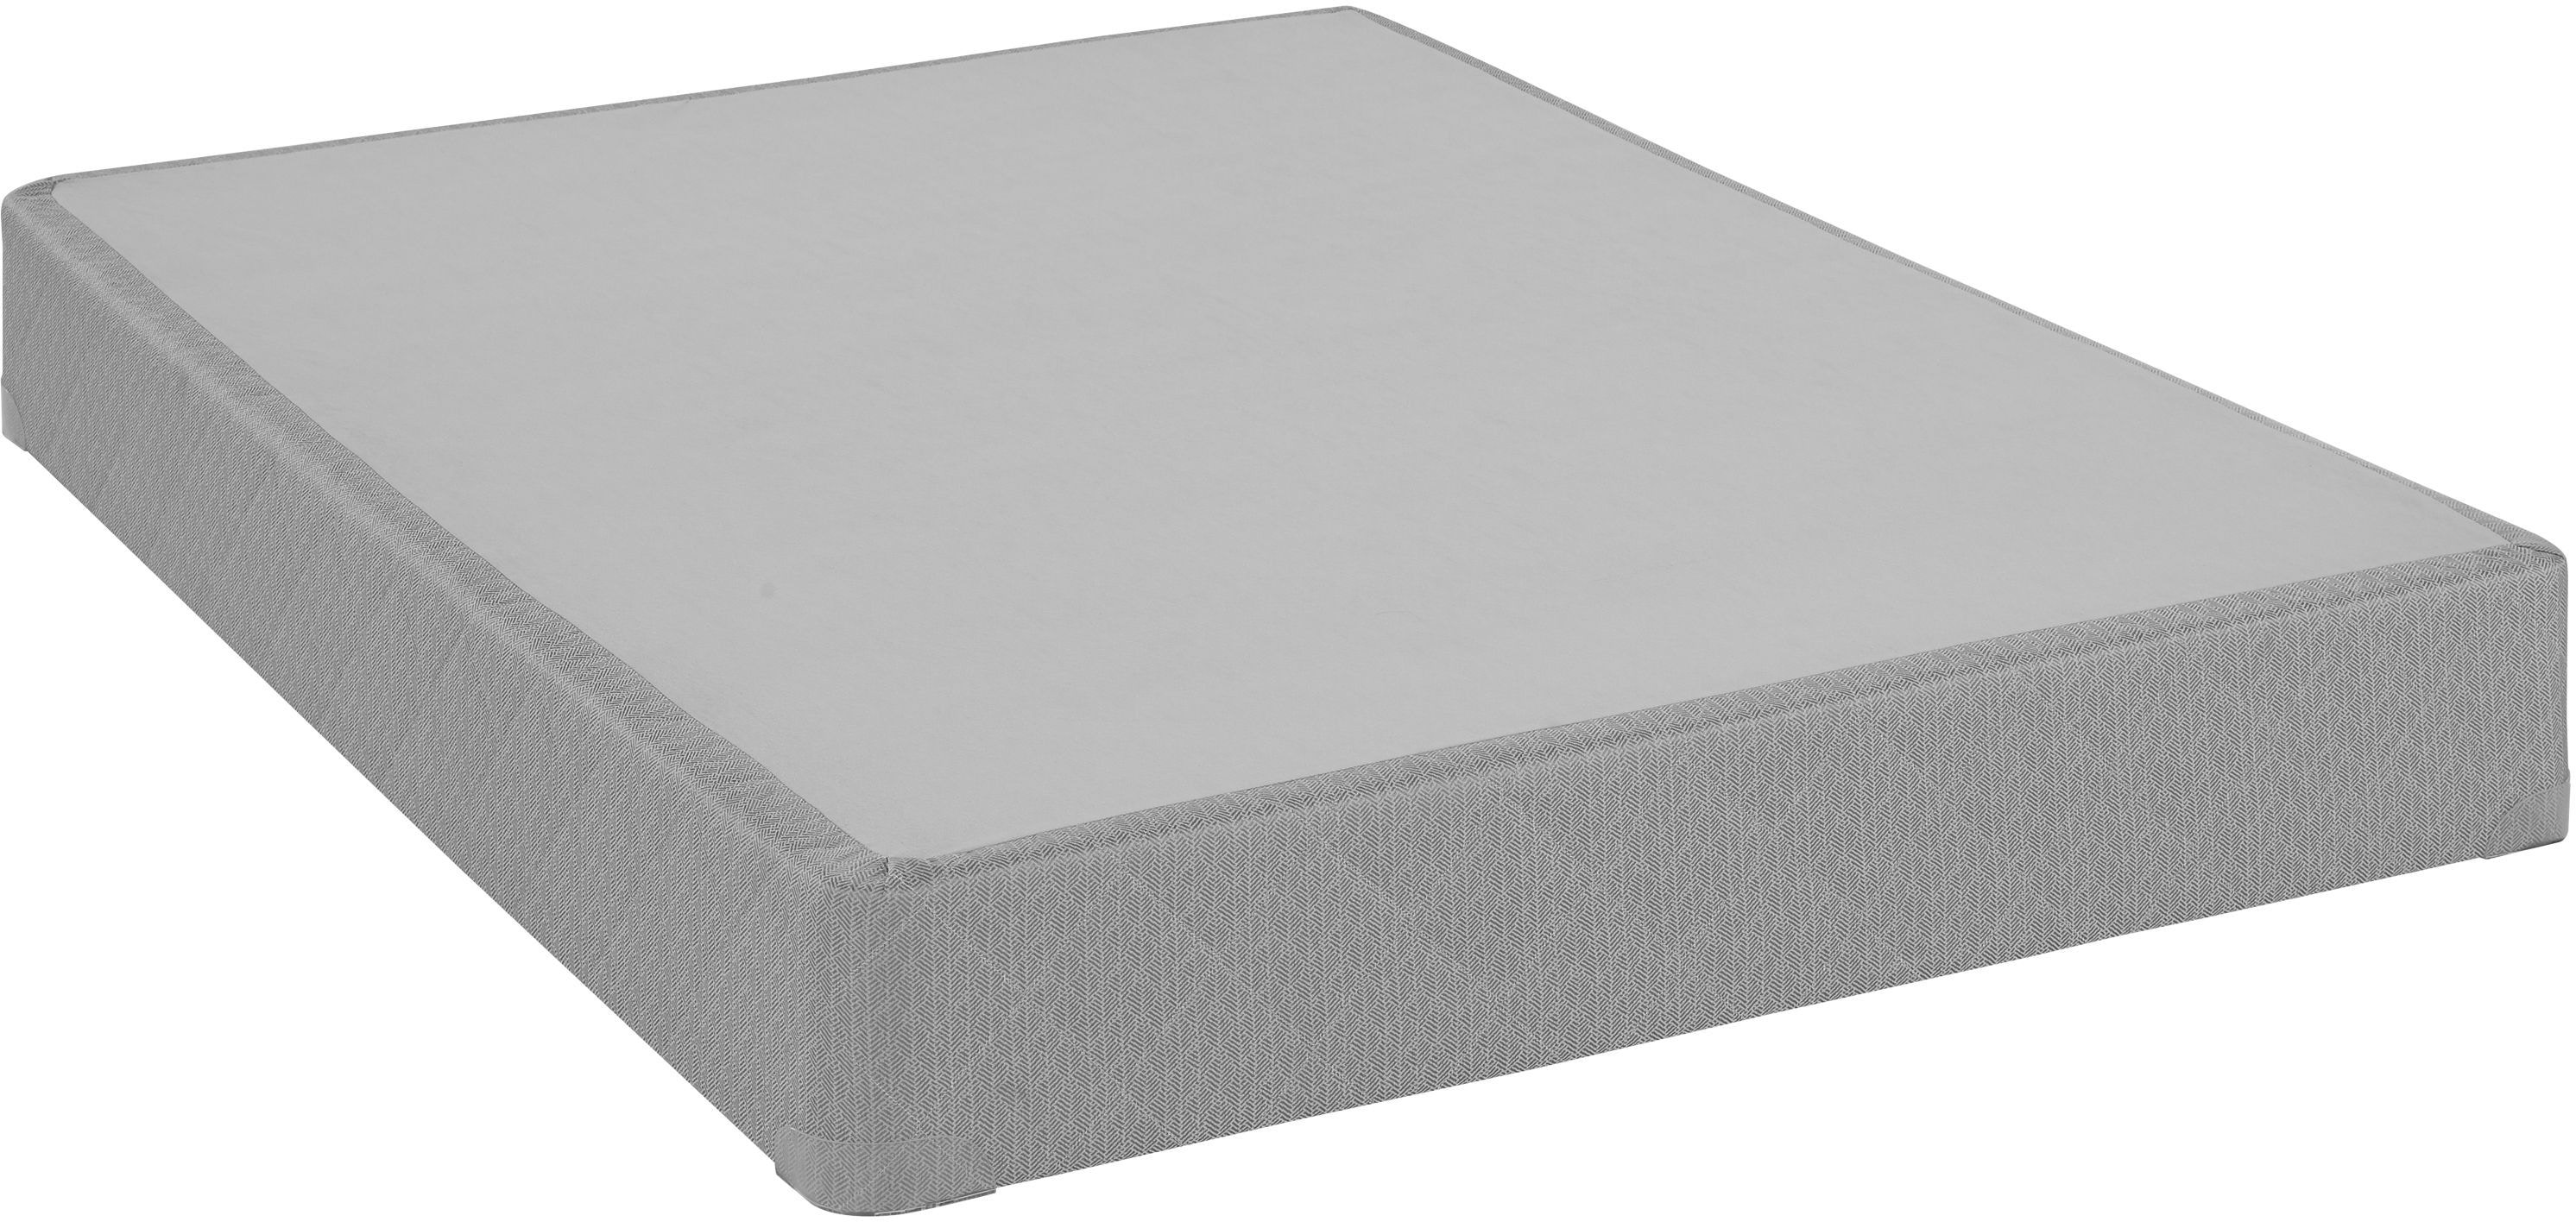 sealy mattress stable support 9 inch